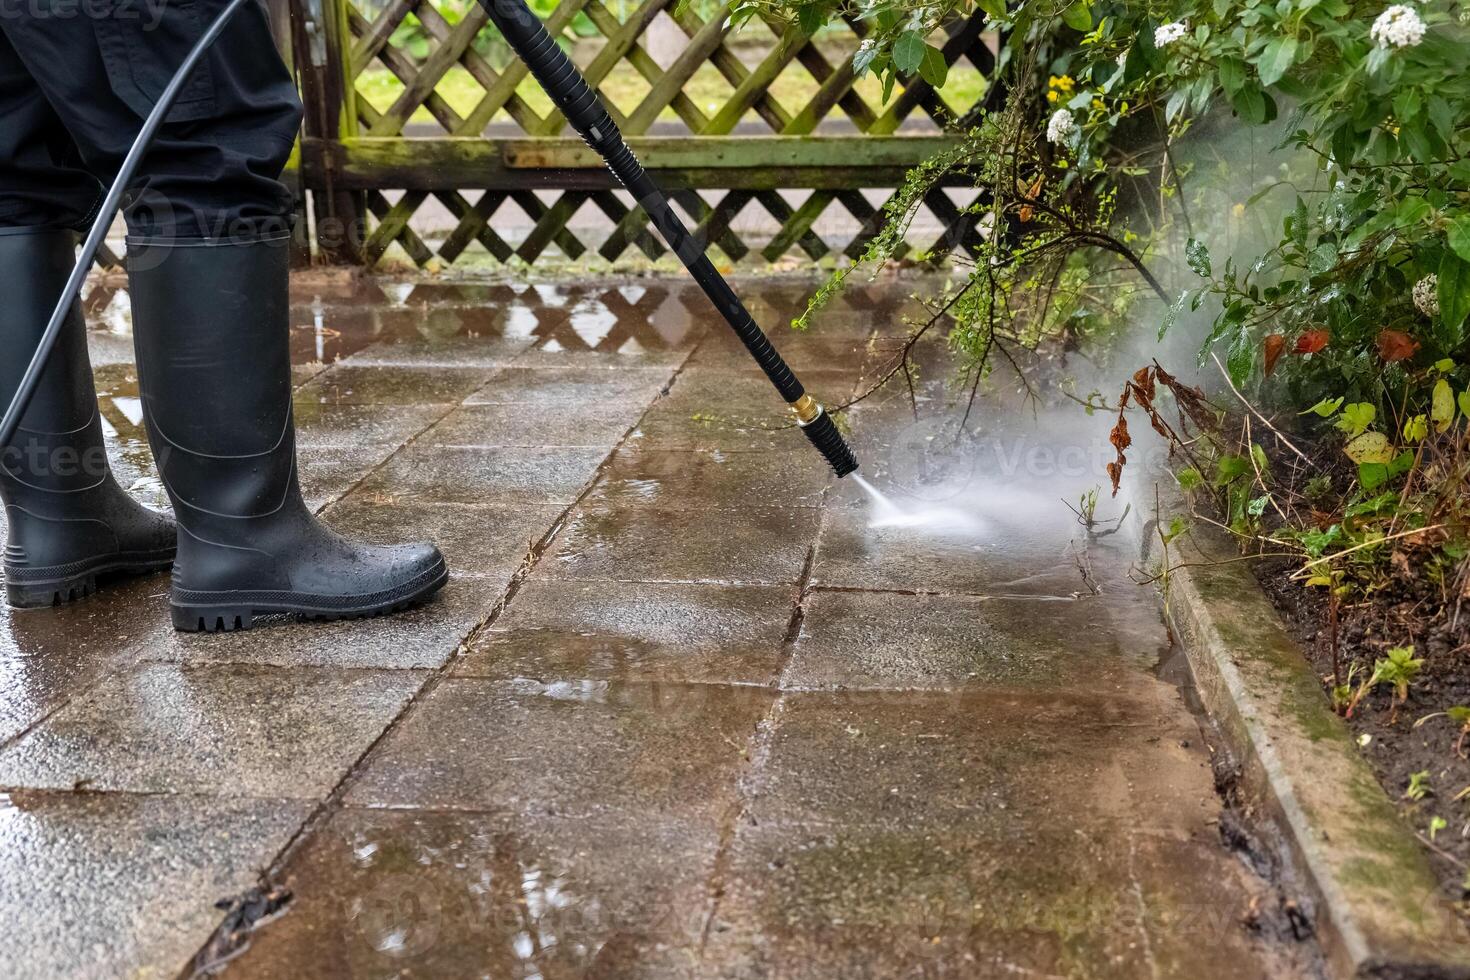 person is using a pressure washer to clean a brick patio photo